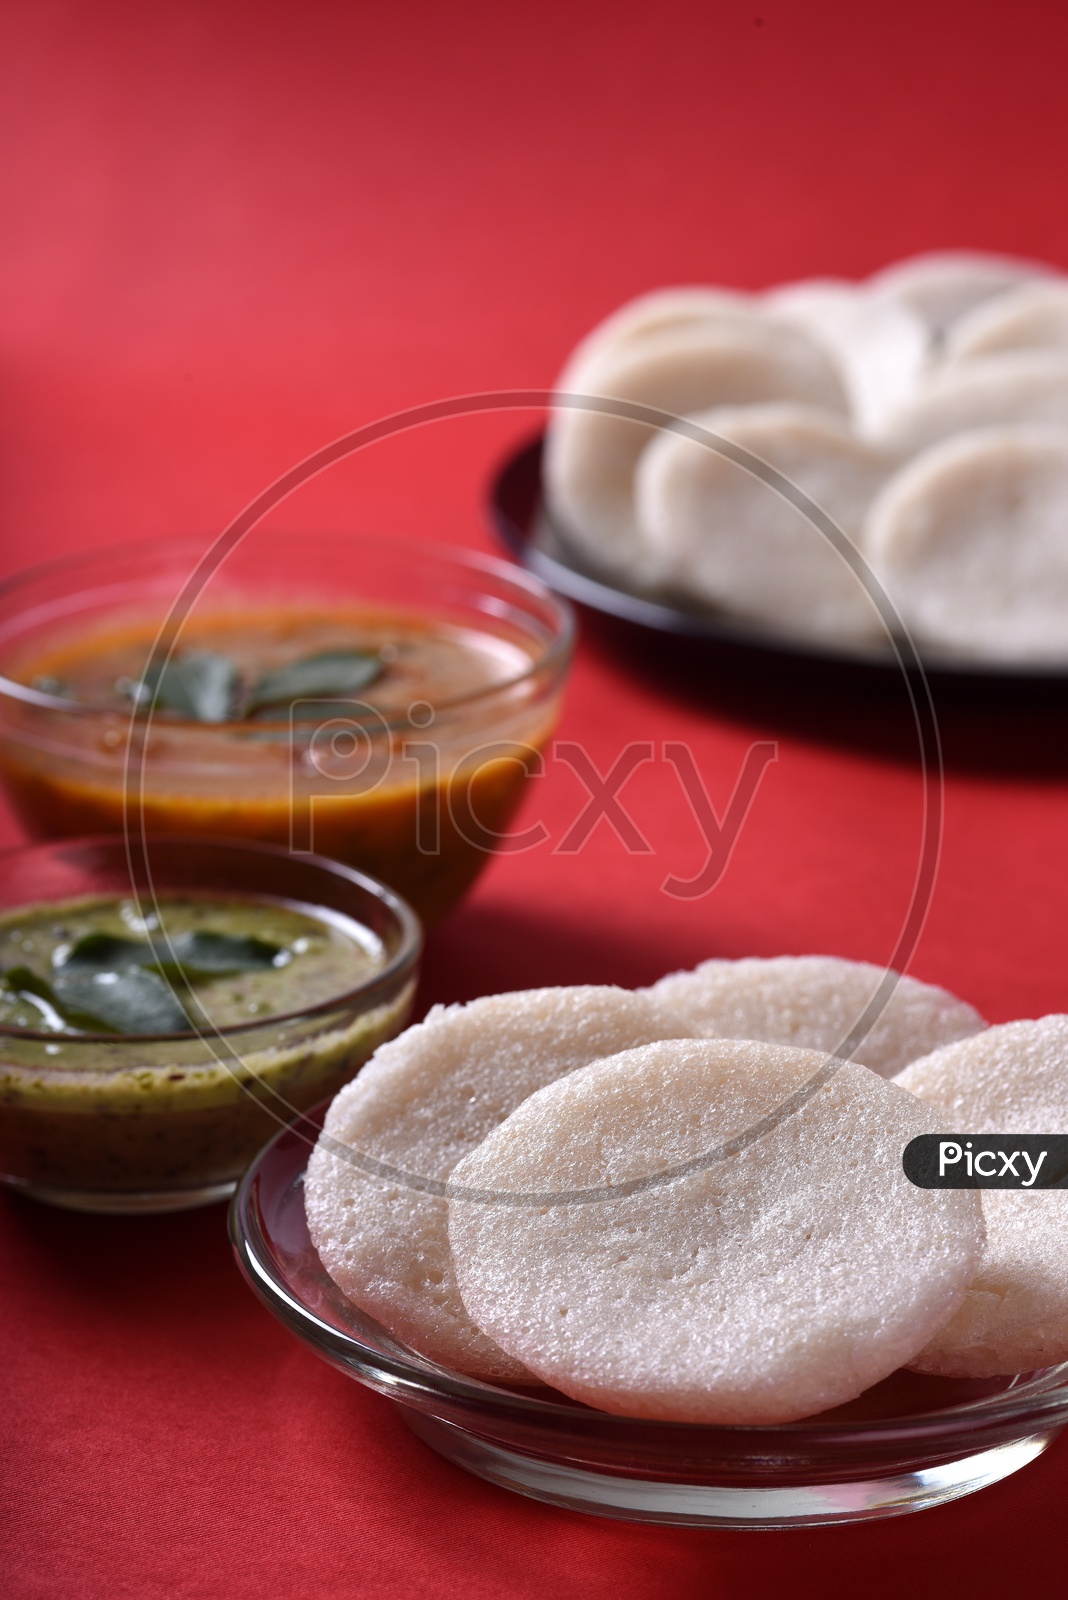 Idli served with sambar and coconut chutney on red background